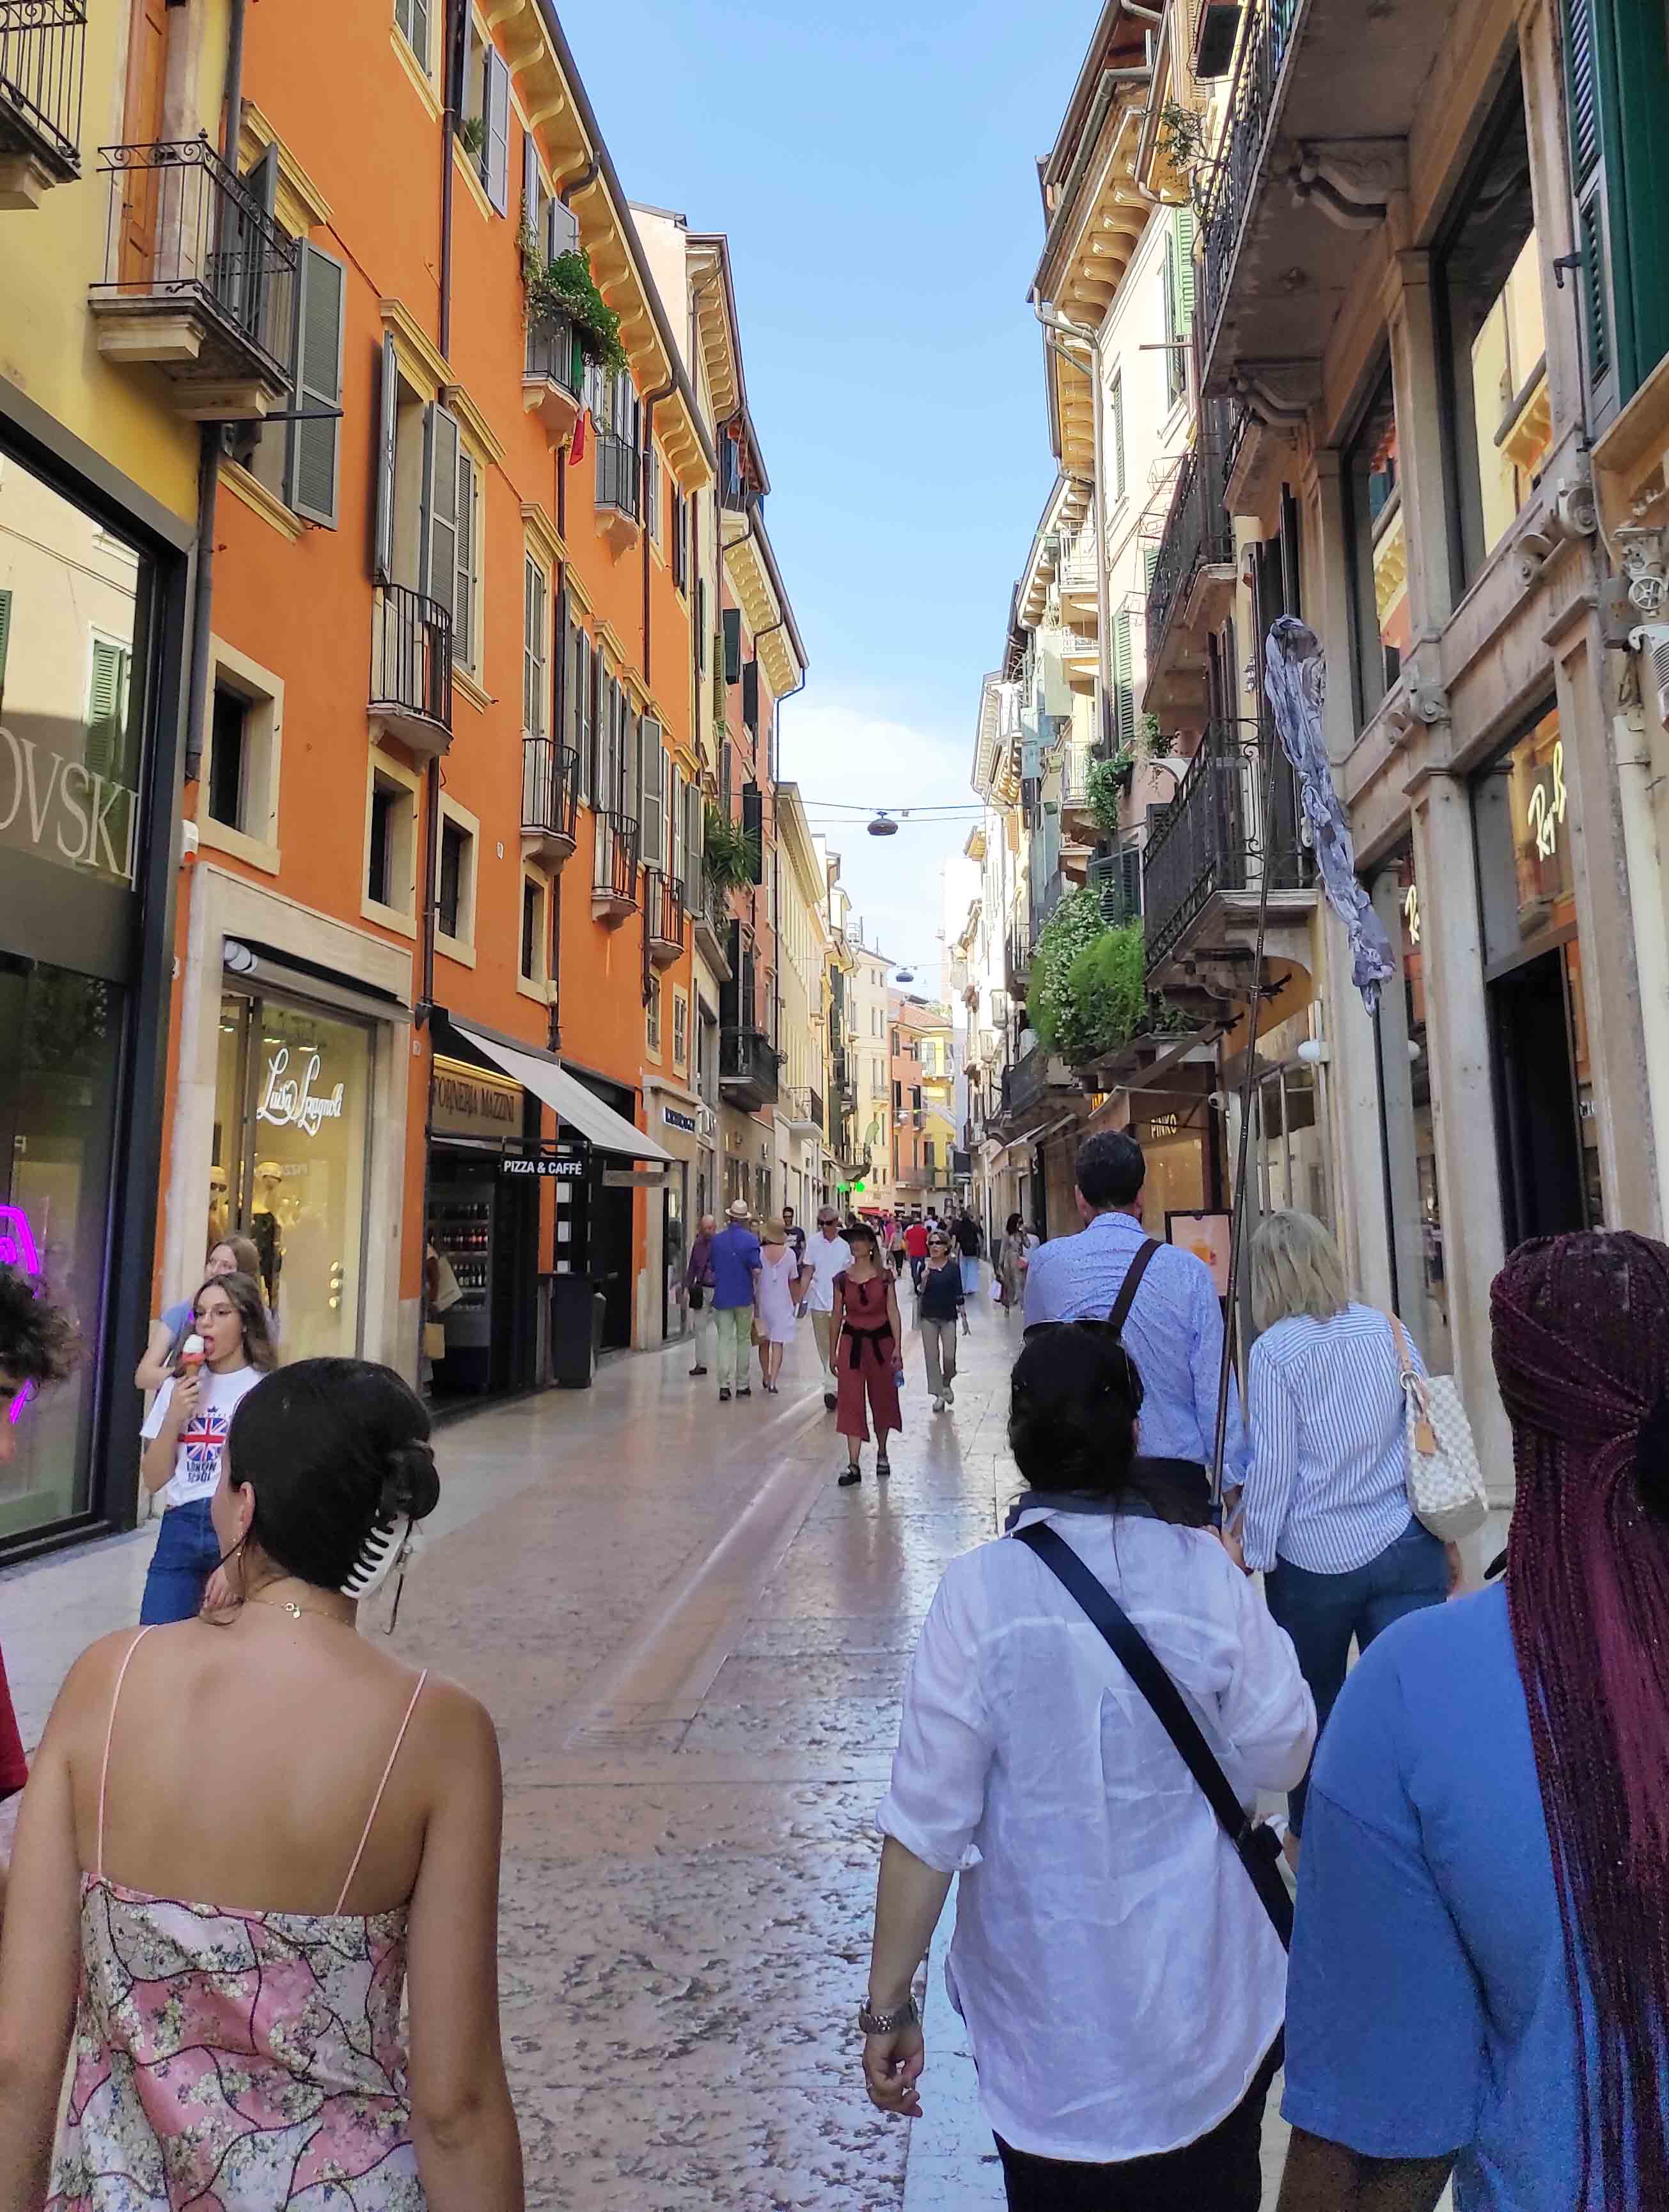 Students exploring in downtown Verona, Italy.